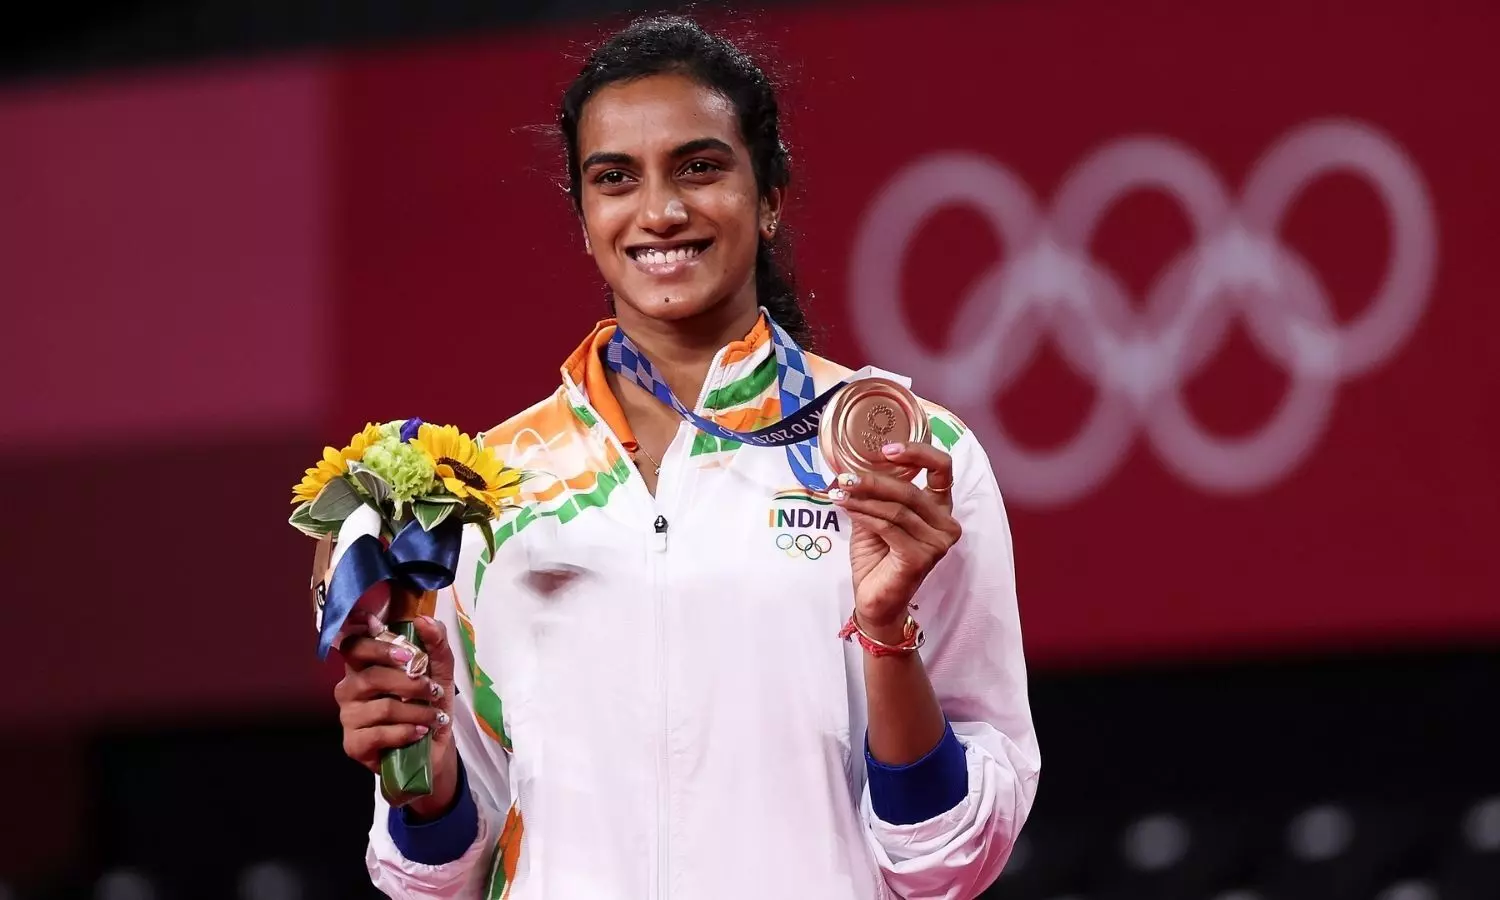 PV Sindhu after her bronze medal win at the Tokyo Olympics (Source: Getty)